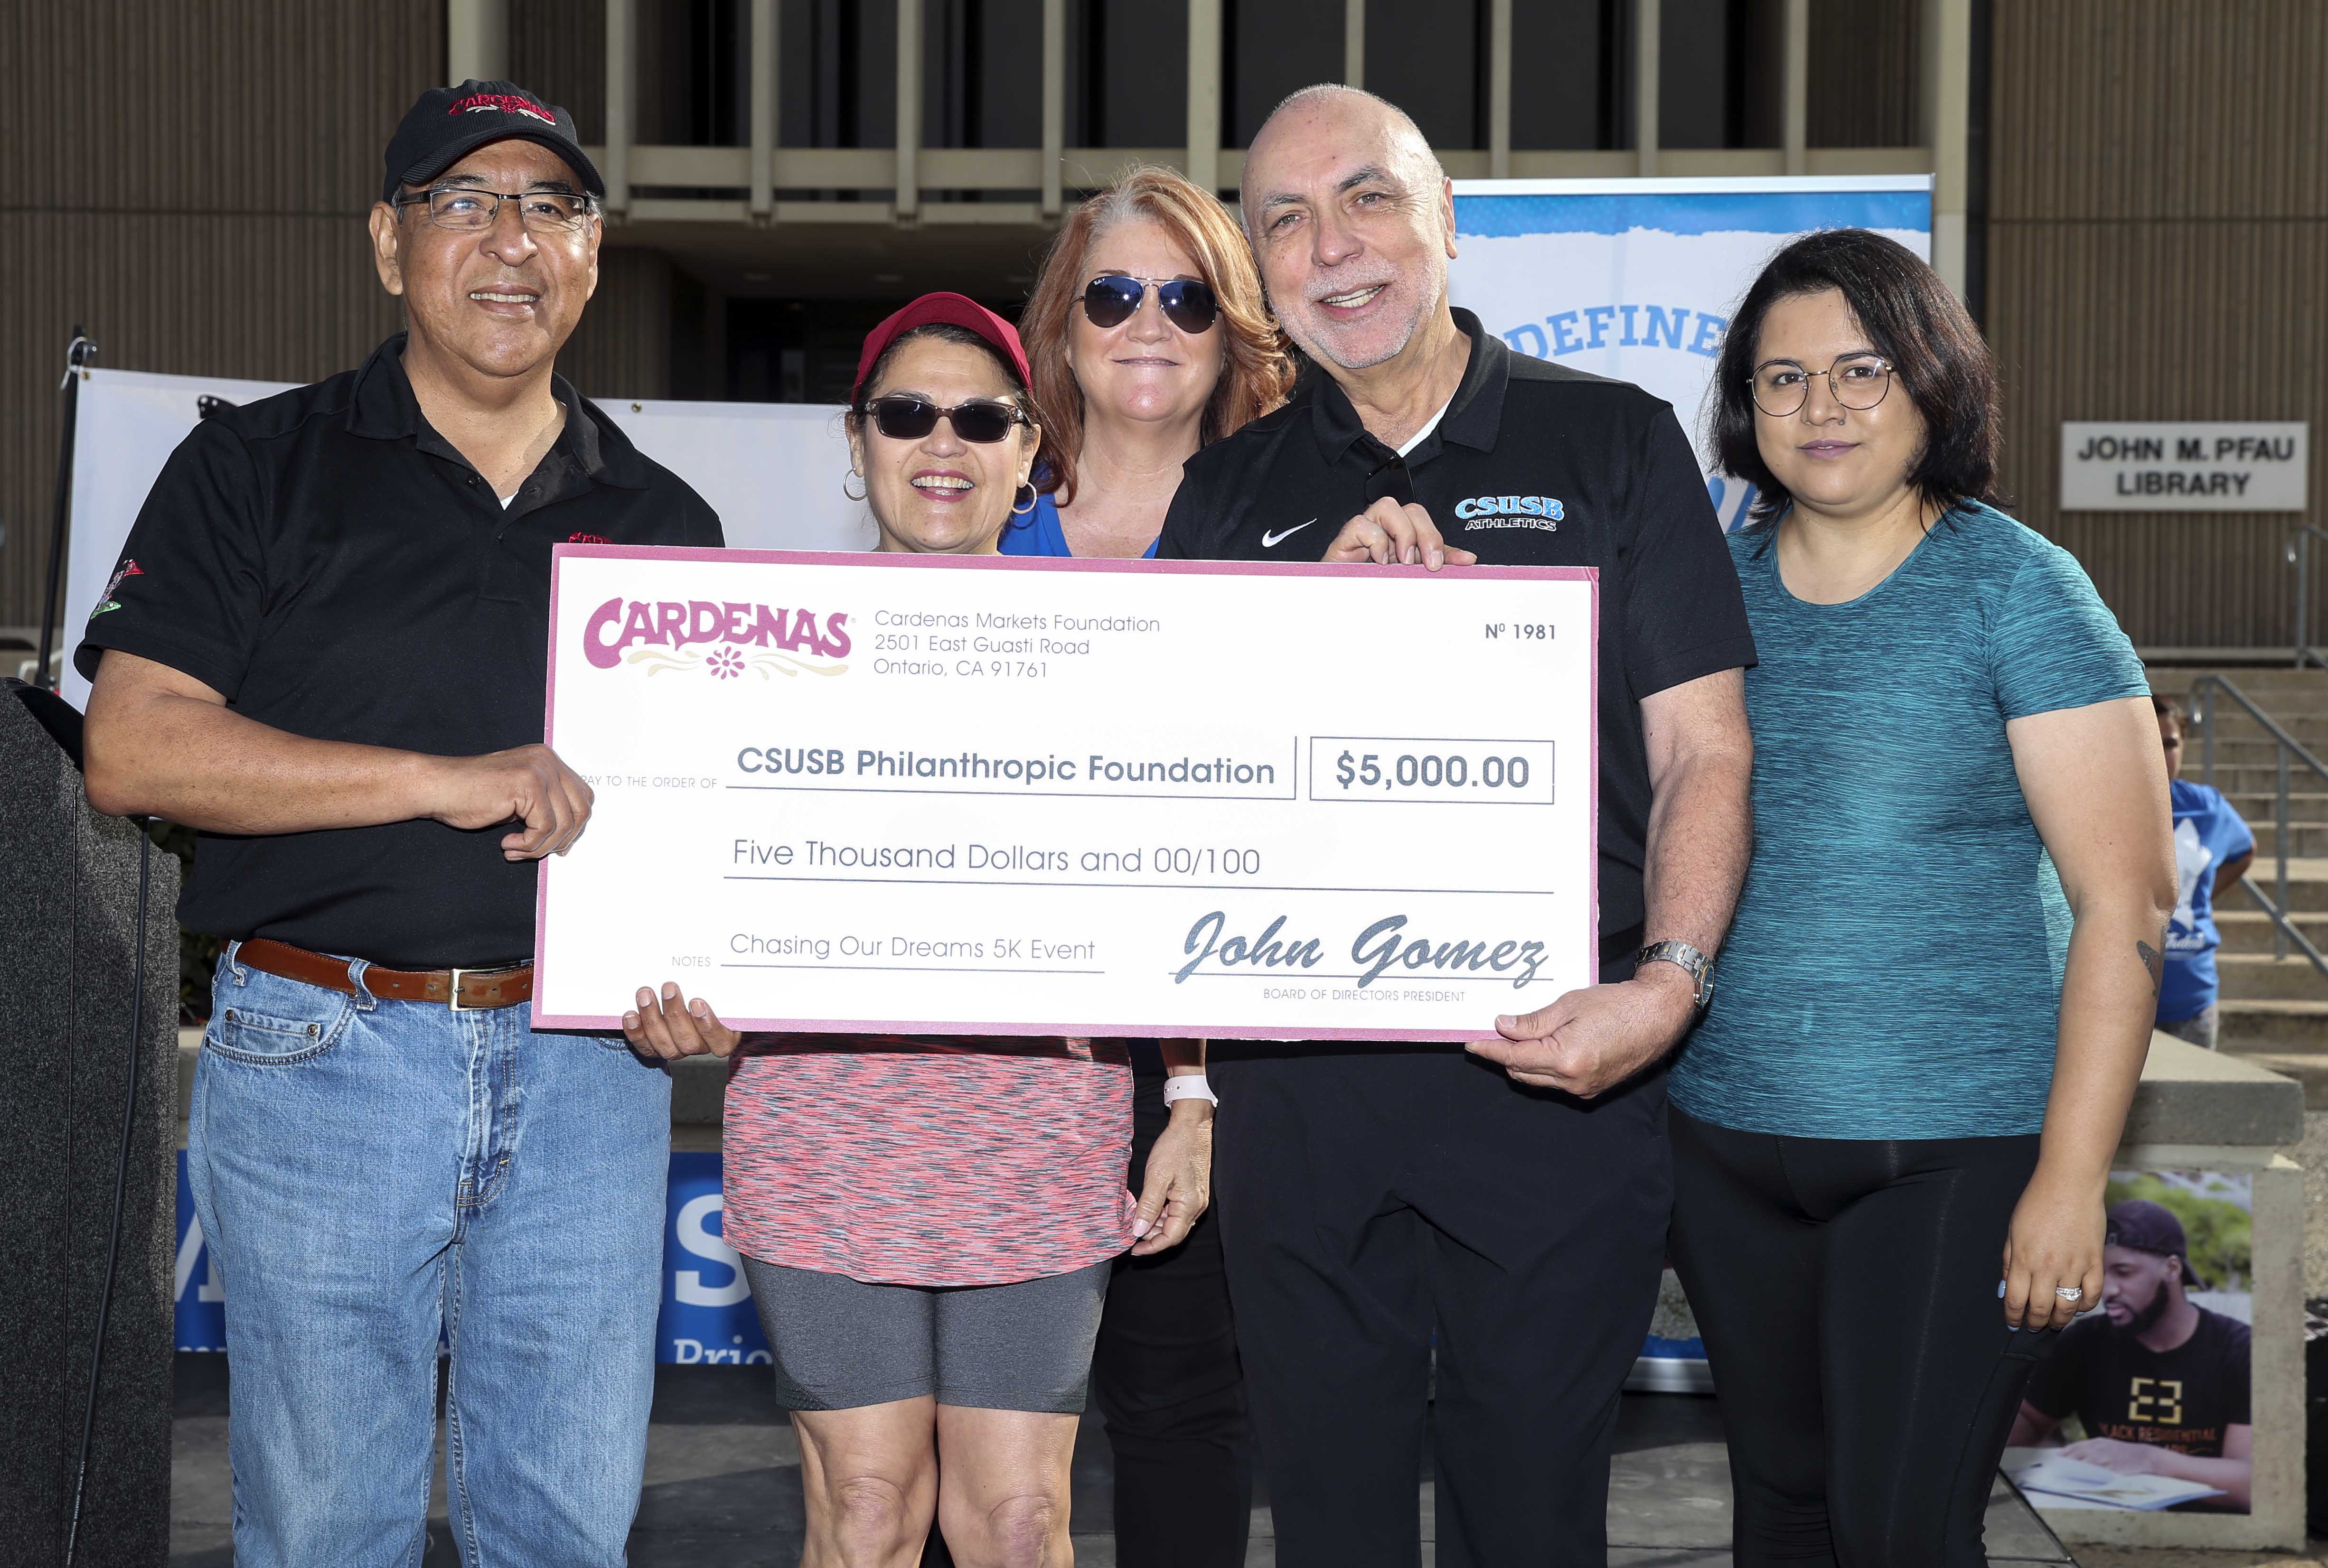 Cardenas Markets donated $5,000 as part of the contributions that will go toward scholarships for CSUSB Dreamers and undocumented students.